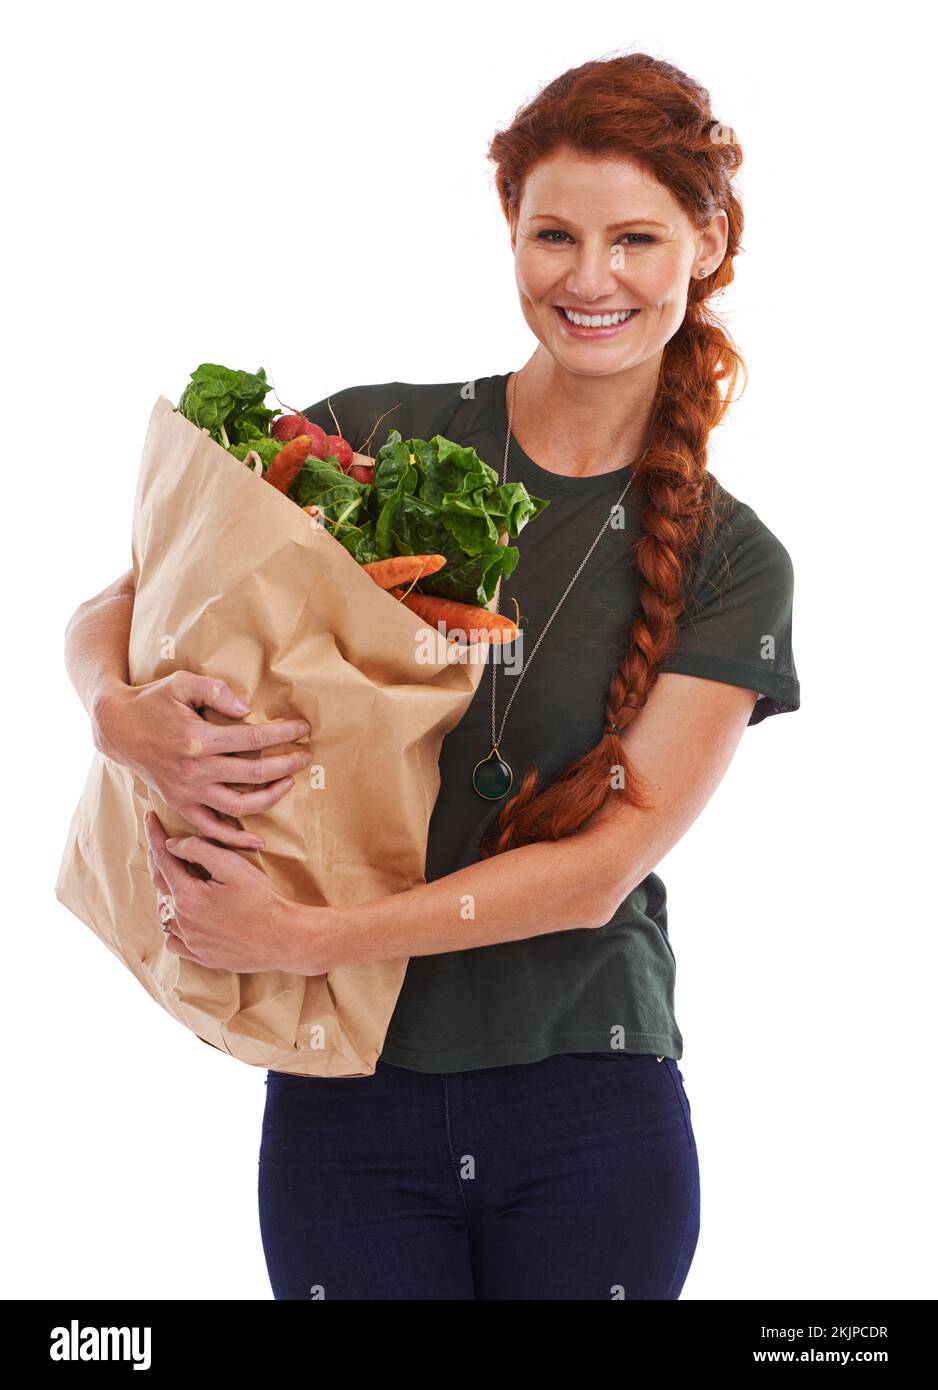 Only the freshest ingredients will do. Studio portrait of a beautiful young woman holding a shopping bag full of fresh vegetables. Stock Photo